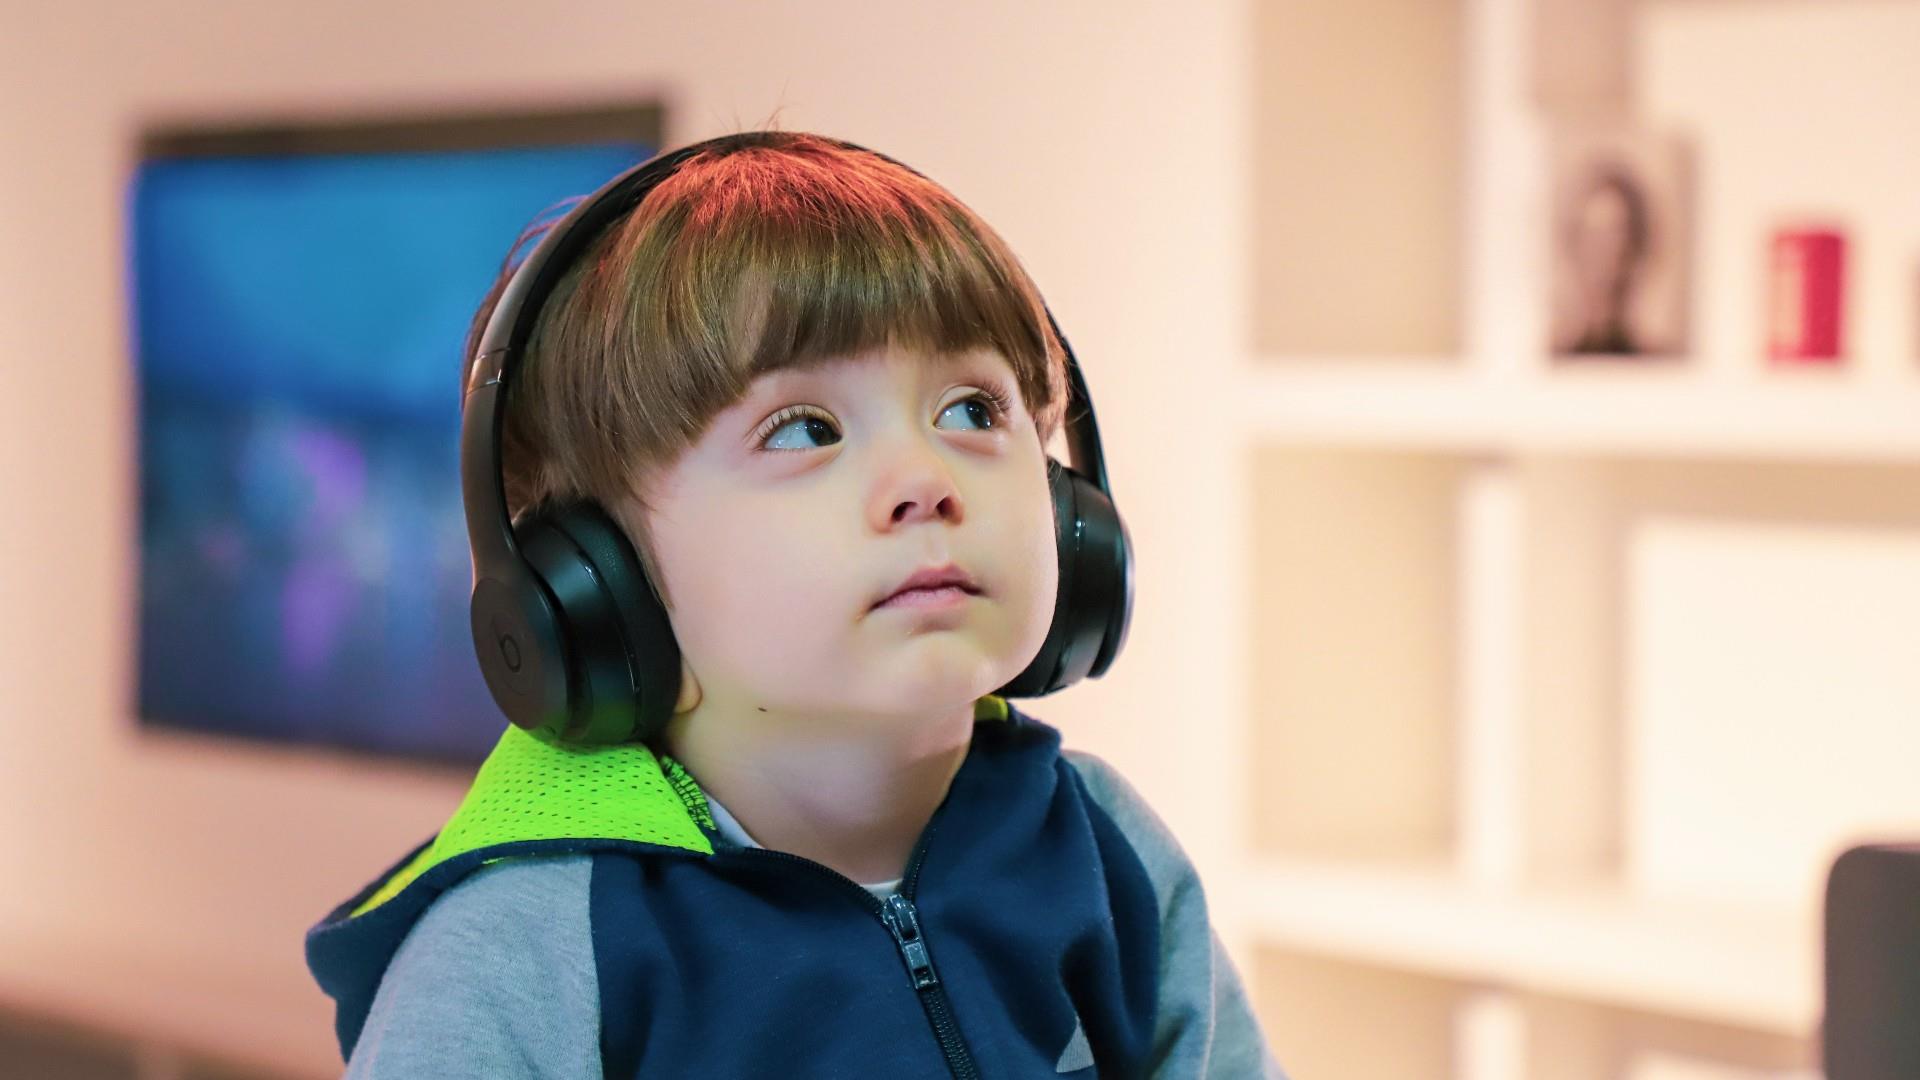 Accessible - Child in Headphones with Autism